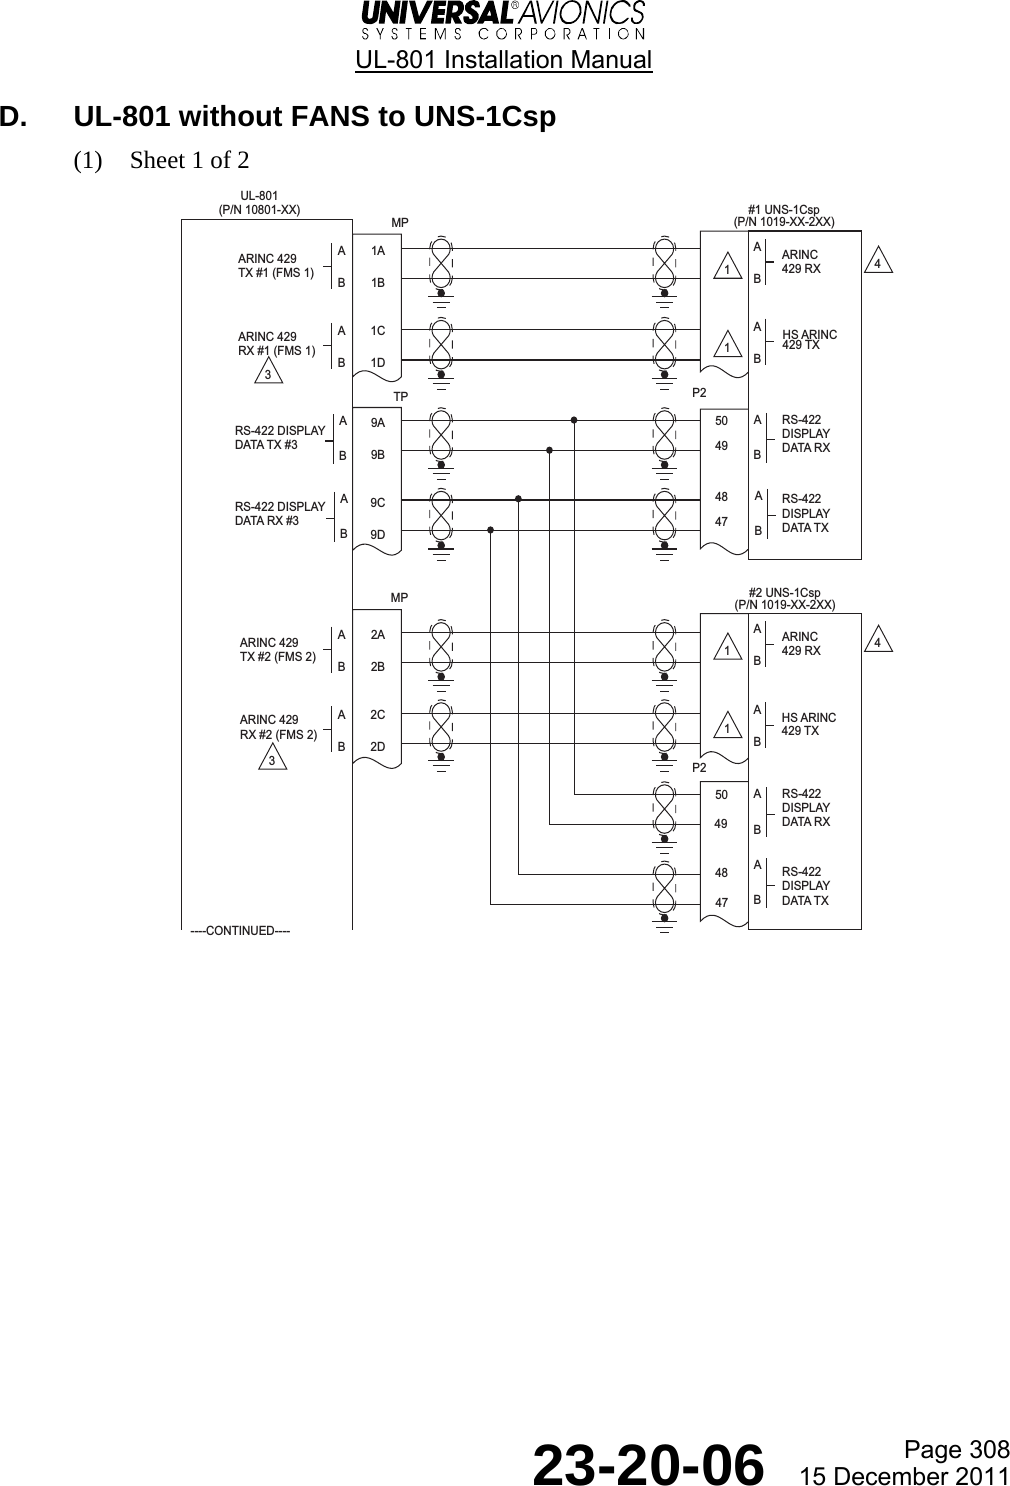  UL-801 Installation Manual  Page 308  23-20-06  15 December 2011 D.  UL-801 without FANS to UNS-1Csp (1) Sheet 1 of 2   UL-801(P/N 10801-XX)A1AB1BARINC 429TX #1 (FMS 1)#1 UNS-1Csp(P/N 1019-XX-2XX)ABARINC429 RXA1CB1DARINC 429RX #1 (FMS 1)ABHS ARINC429 TXABARINC429 RXA2CB2DARINC 429RX #2 (FMS 2)ABHS ARINC429 TXMP----CONTINUED----A2AB2BARINC 429TX #2 (FMS 2)RS-422 DISPLAYDATA TX #3RS-422 DISPLAYDATA RX #39A9BRS-422DISPLAYDATA RX9C9DRS-422DISPLAYDATA TXRS-422DISPLAYDATA RXRS-422DISPLAYDATA TXMPTP50494847P233441111#2 UNS-1Csp(P/N 1019-XX-2XX)5048P2ABABABABABAB4947